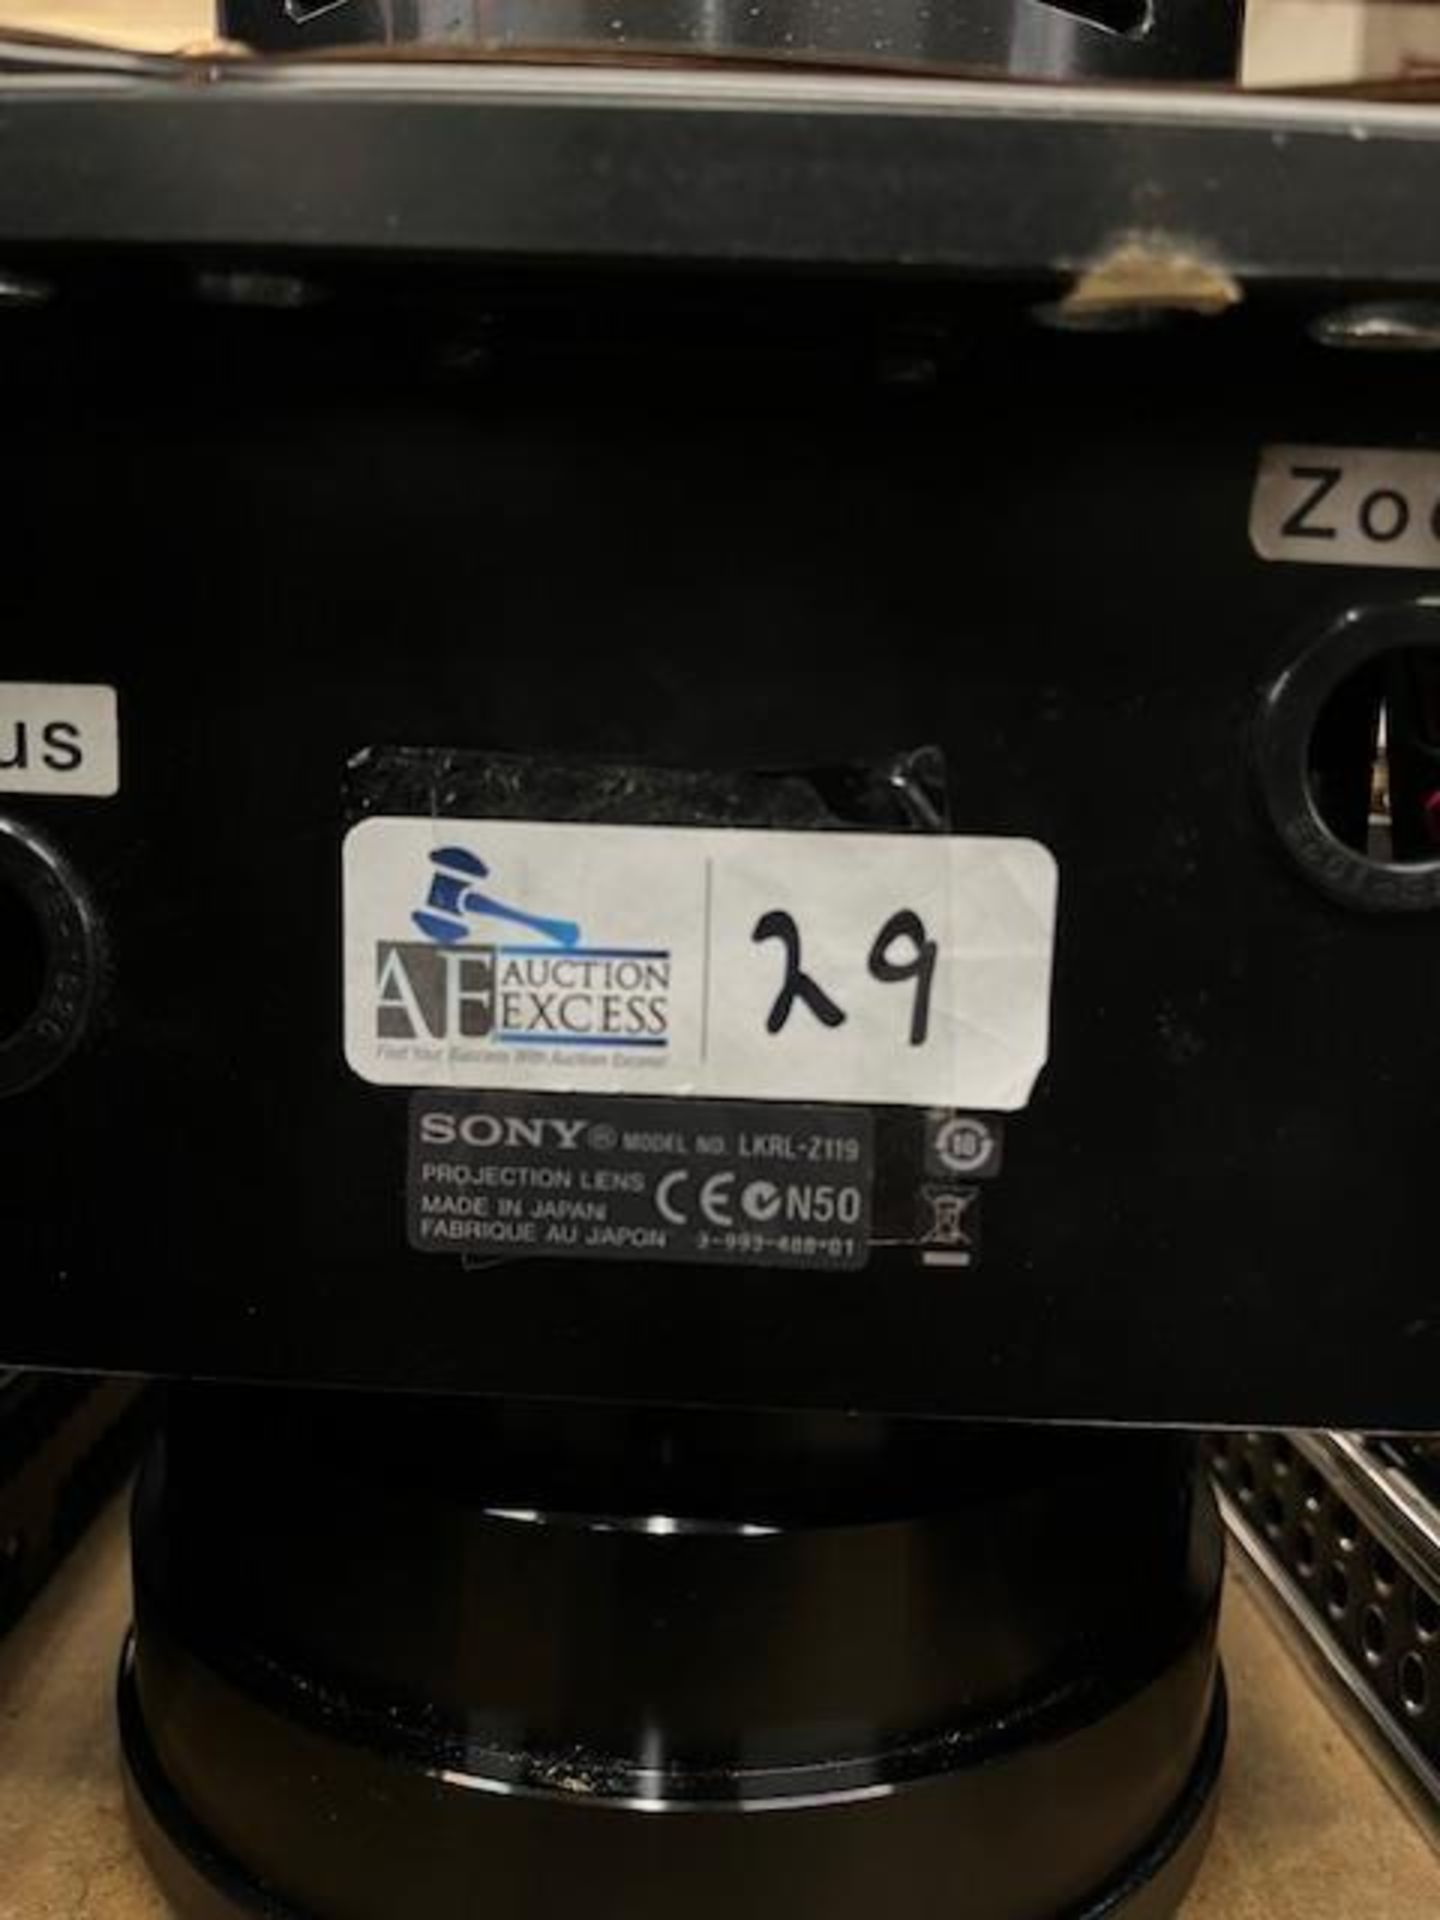 SONY LKRL-Z119 PROJECTOION LENS - Image 3 of 3